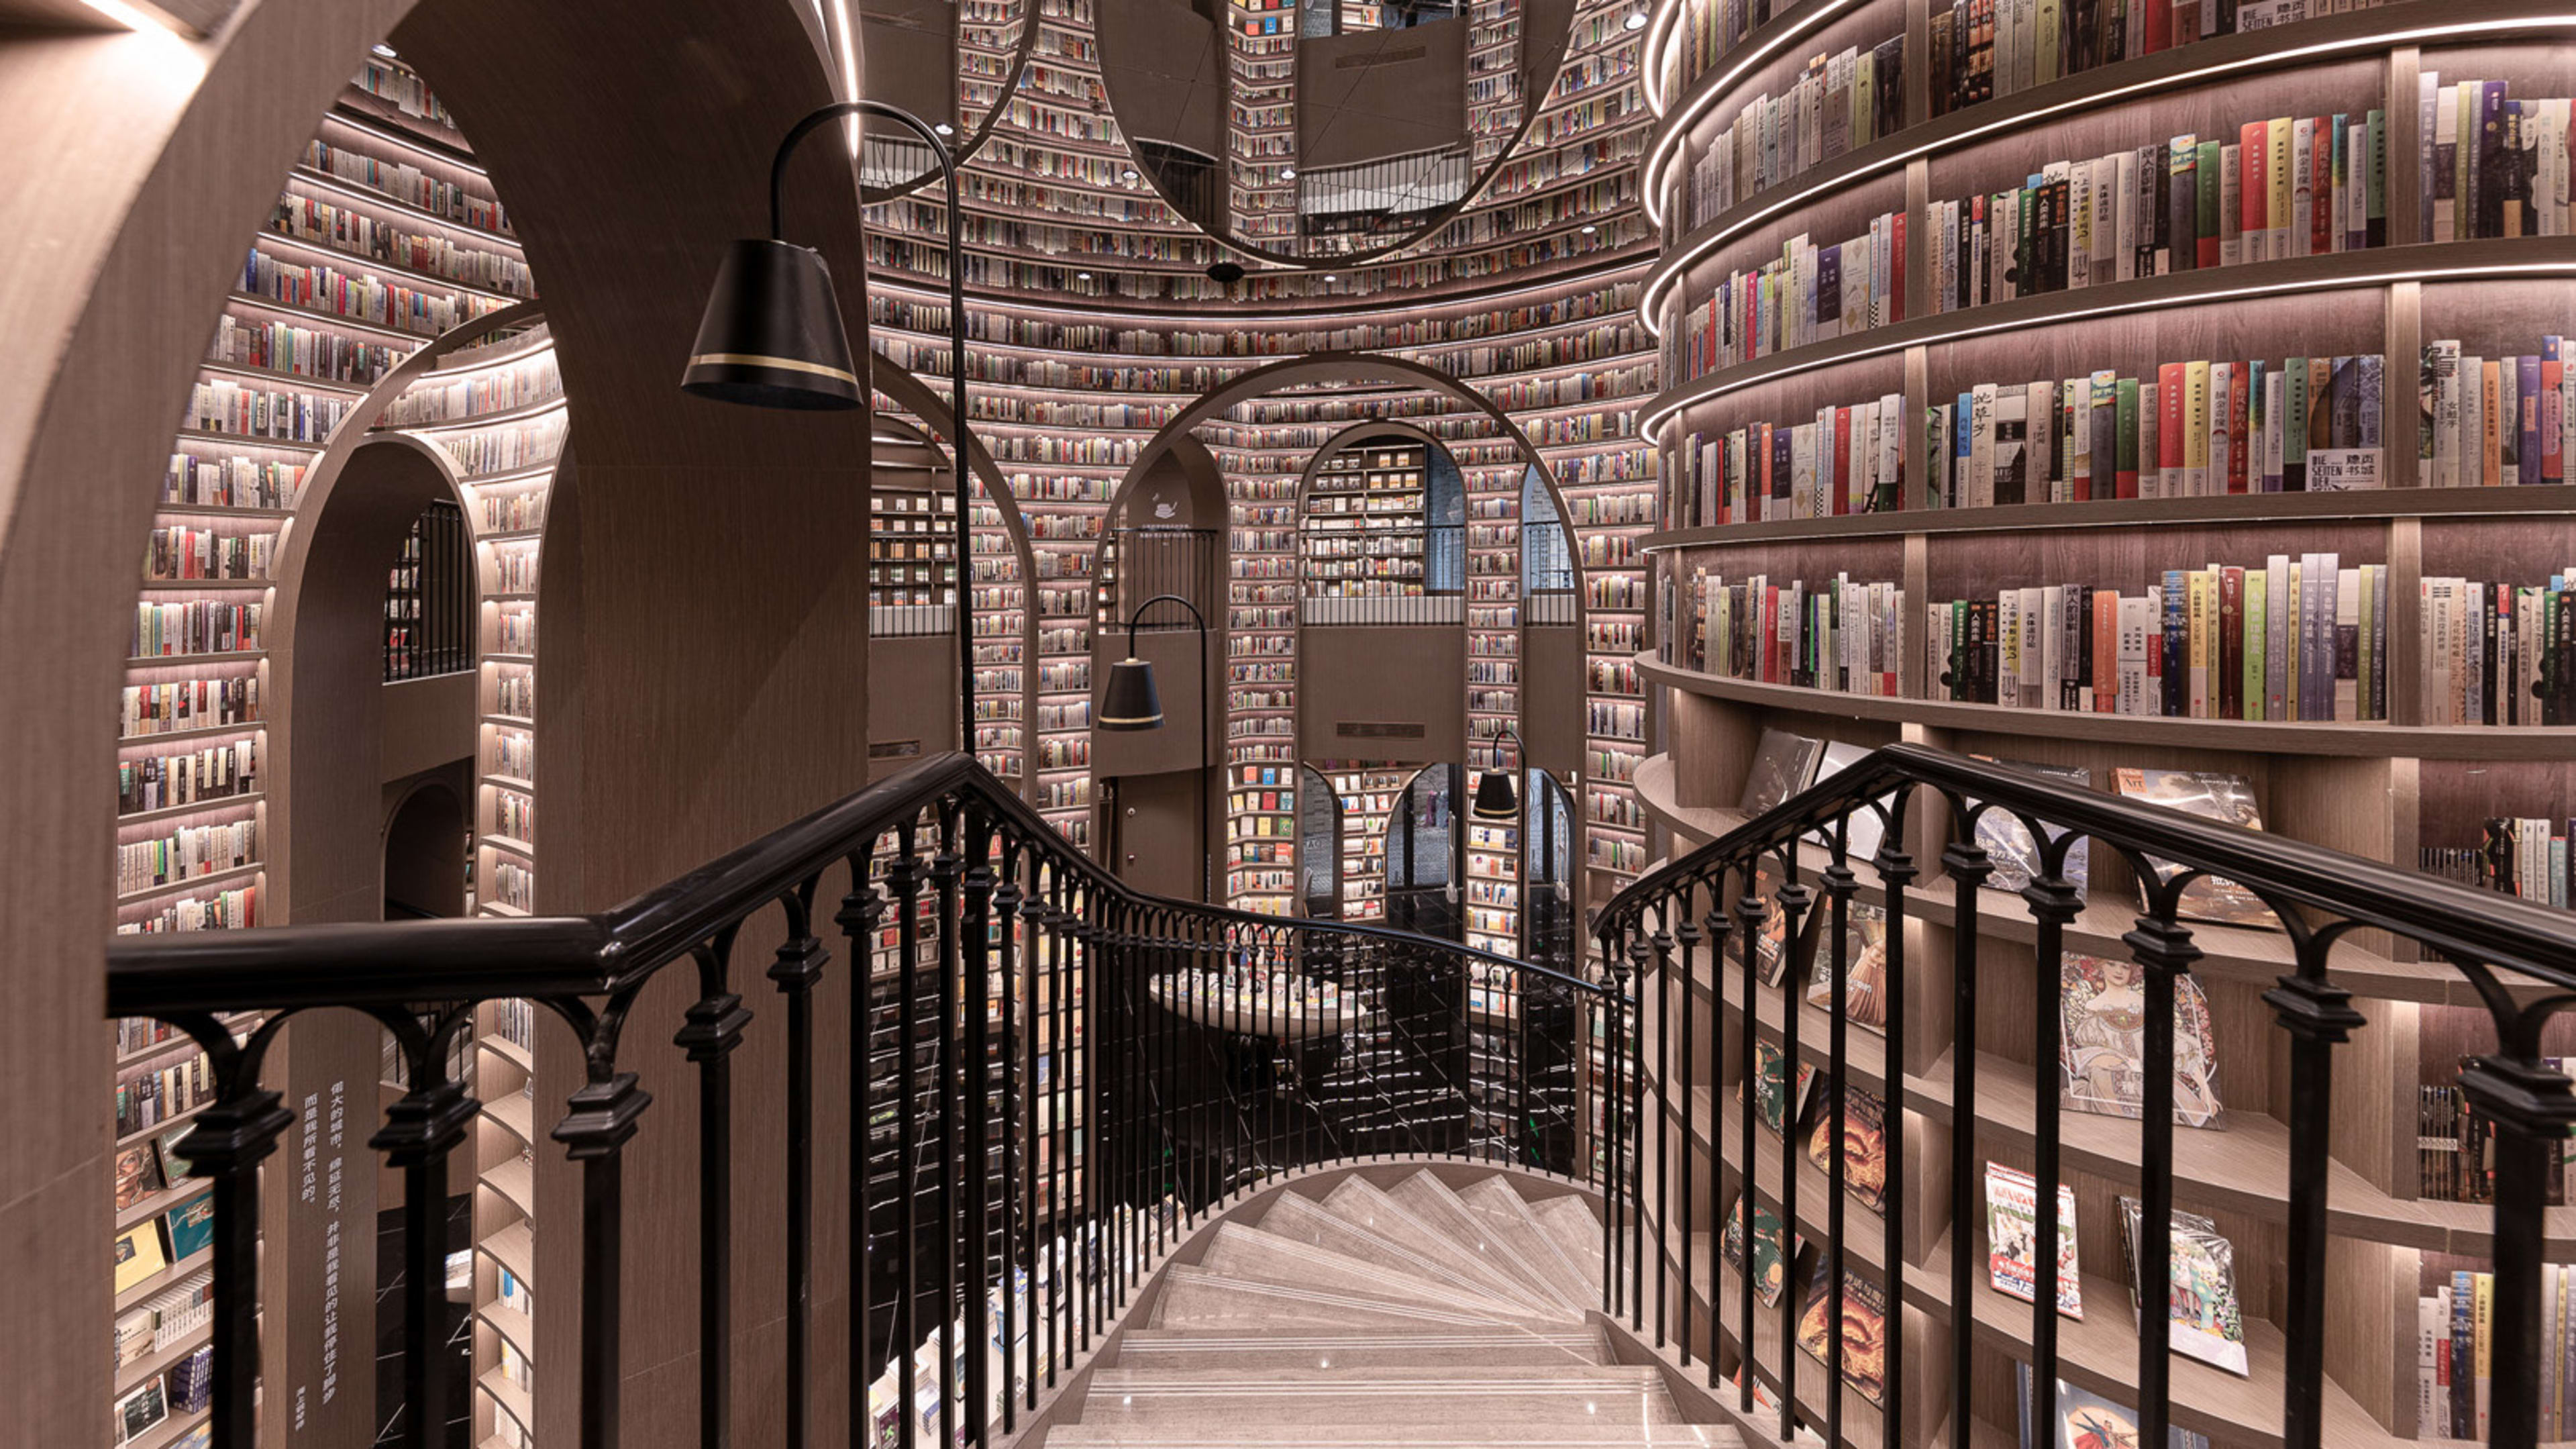 See inside one of the world’s most beautiful bookstores